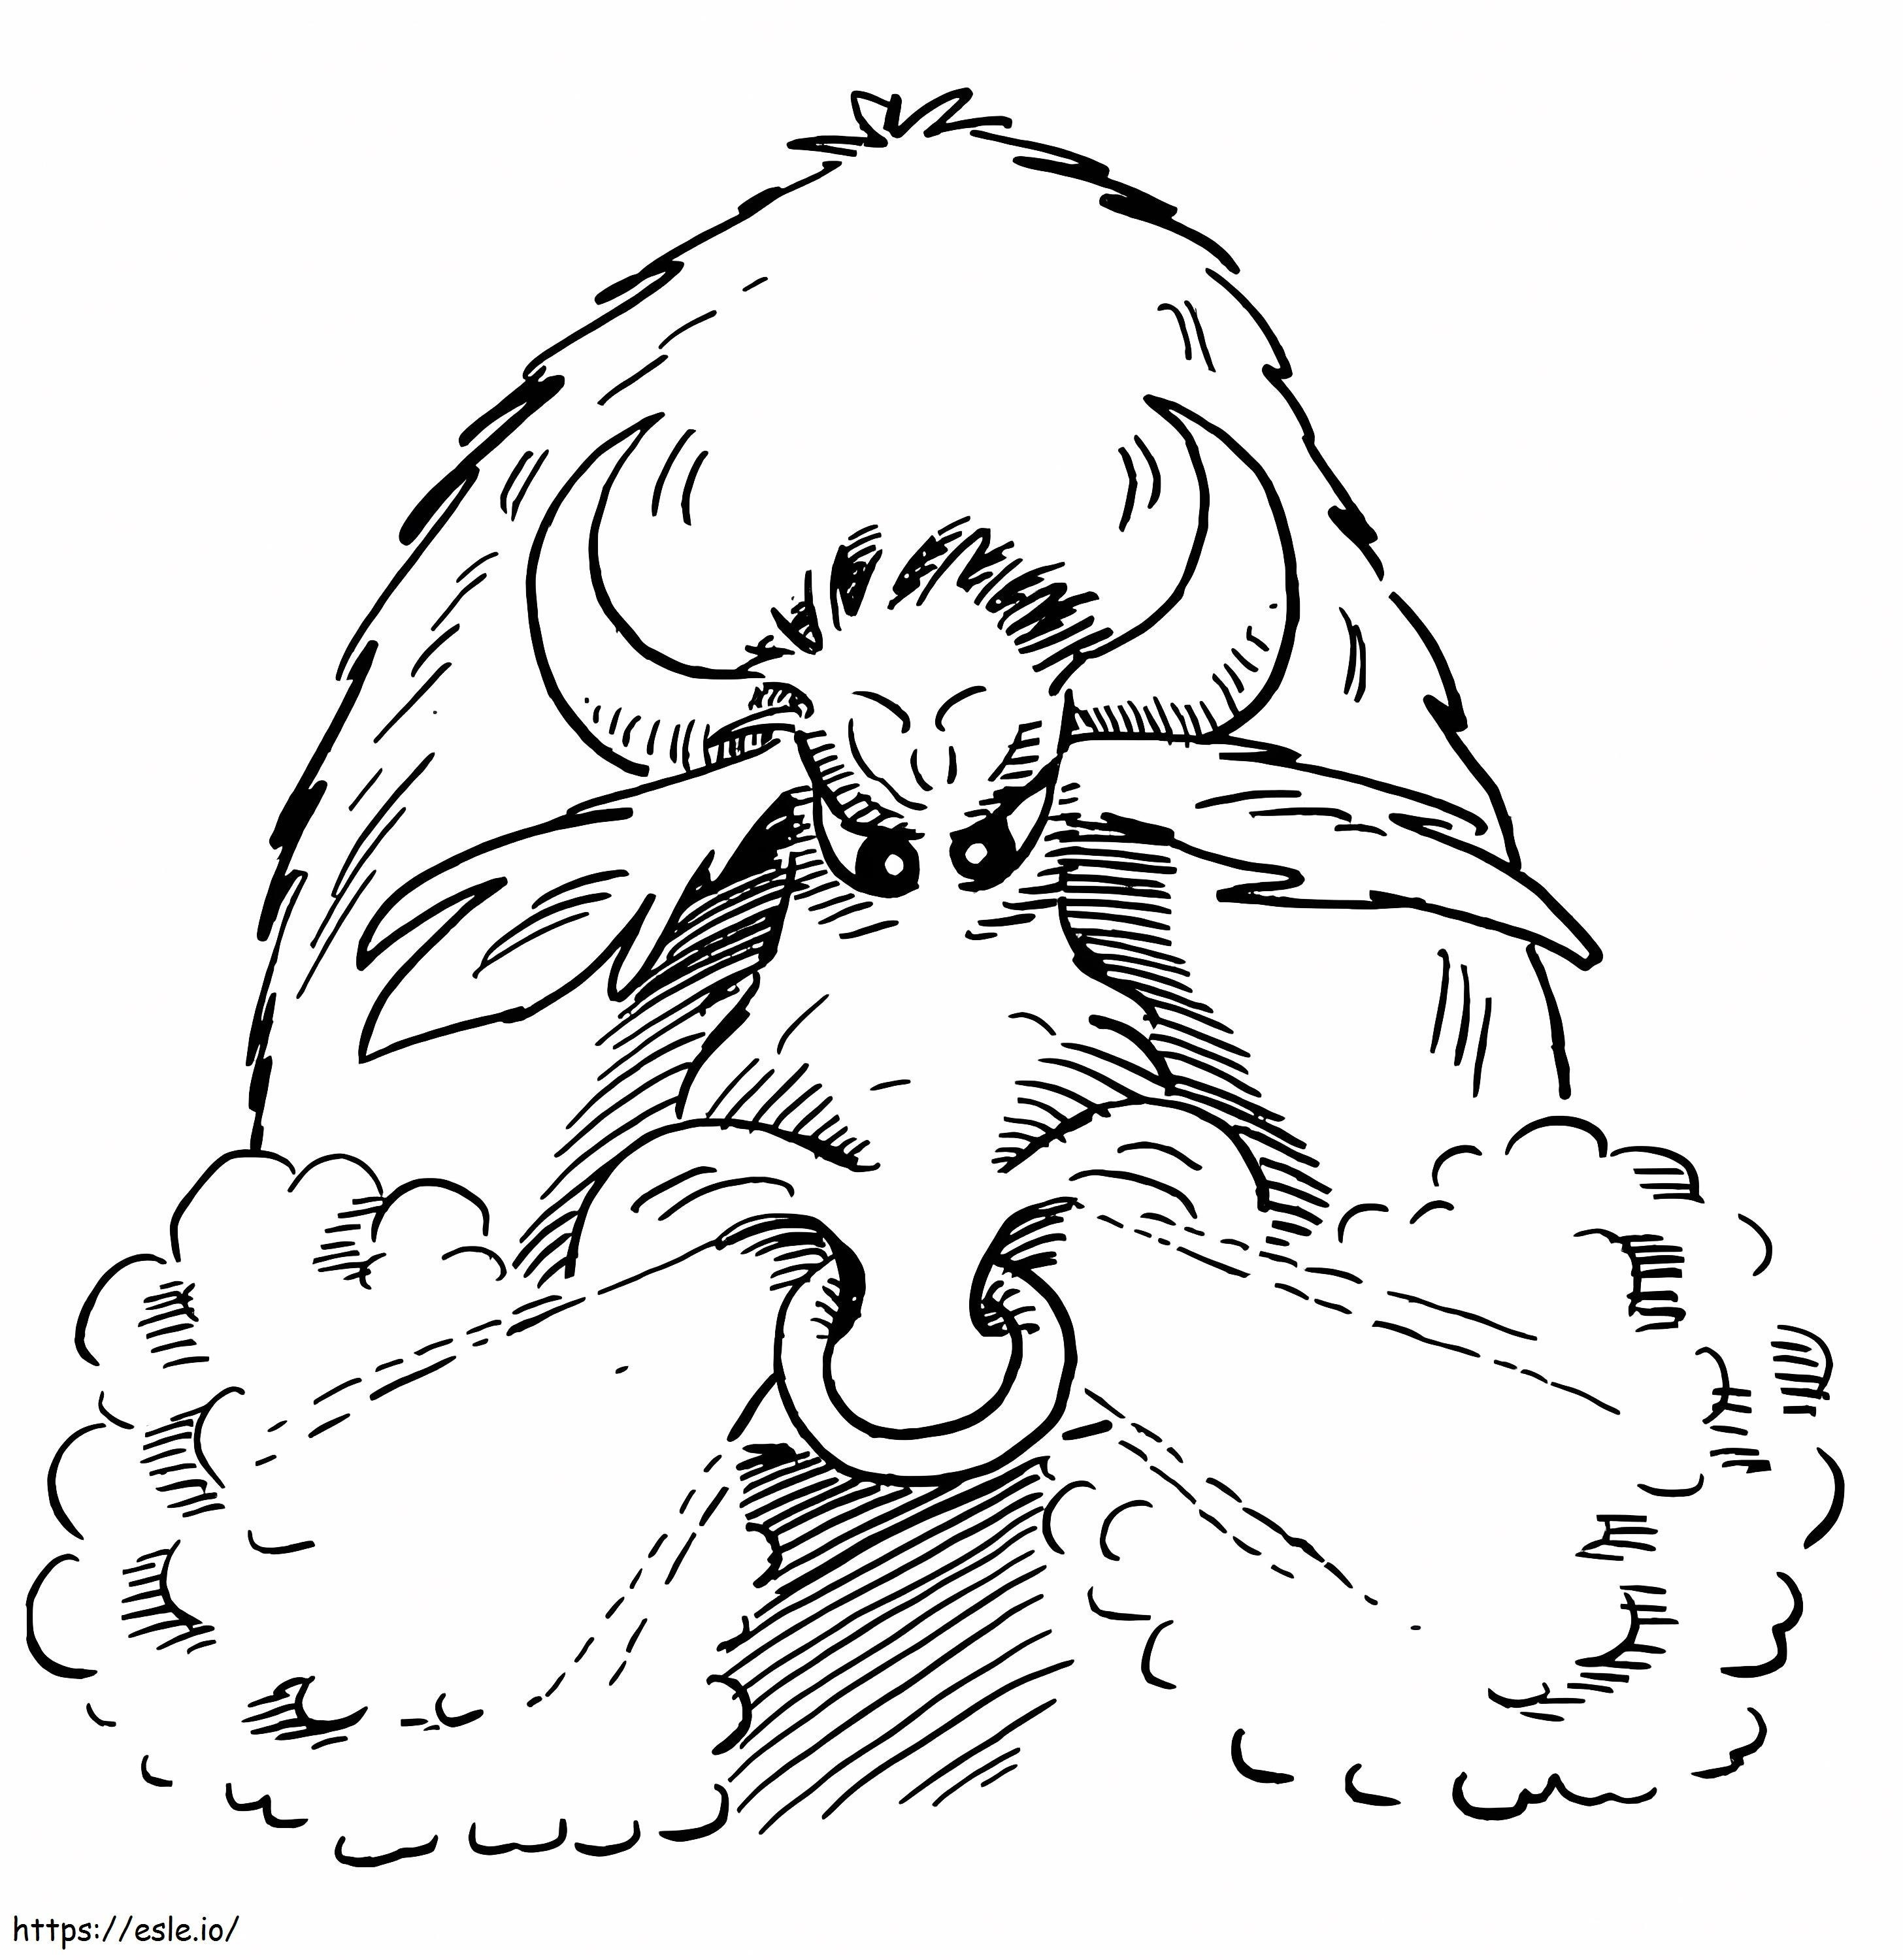 Angry Bull coloring page